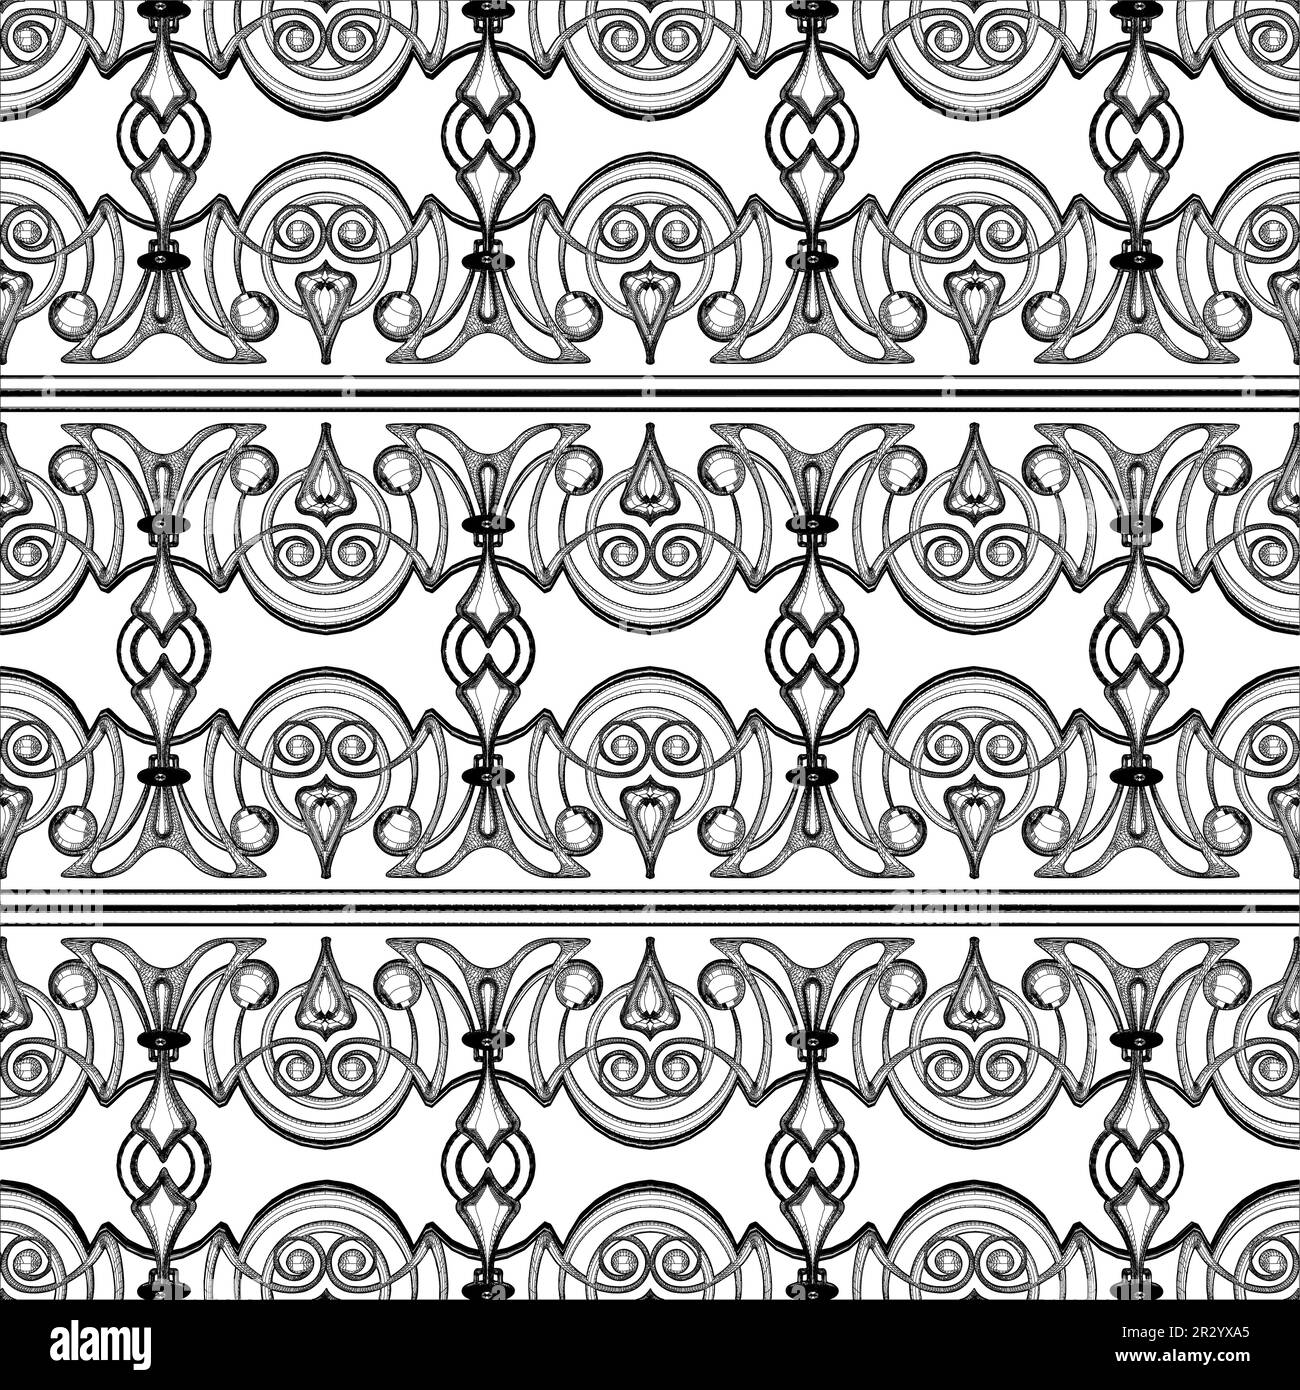 Antique Wall Panel Frame Vector. Illustration Isolated On White Background. Art Deco Art Nouveau Wall Panel Texture Pattern. Stock Vector